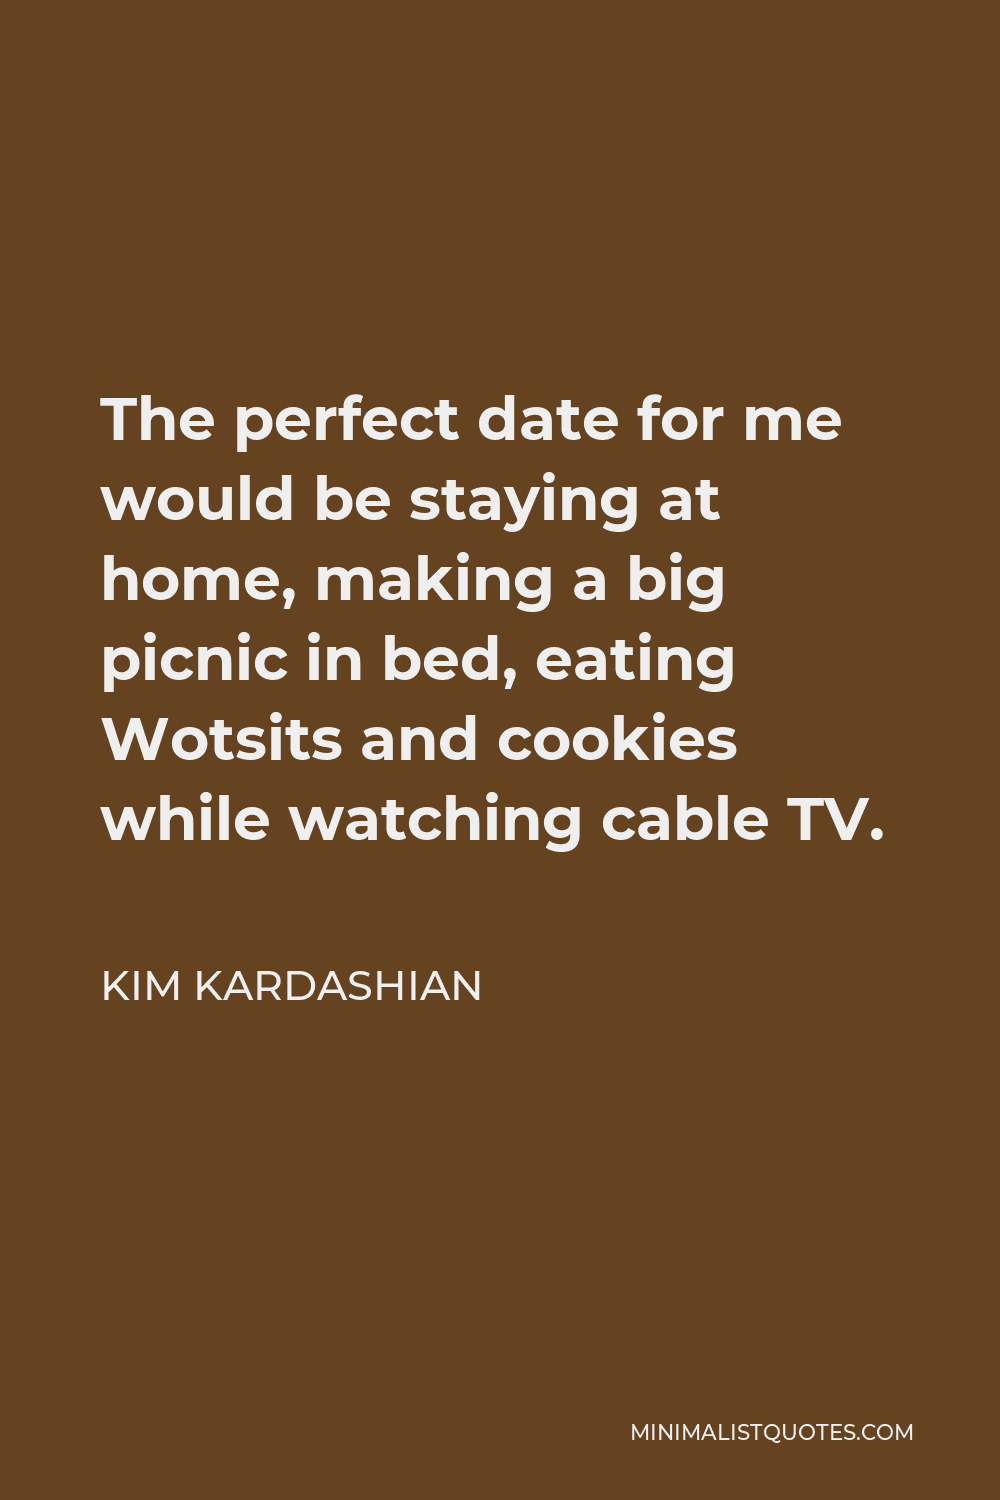 Kim Kardashian Quote - The perfect date for me would be staying at home, making a big picnic in bed, eating Wotsits and cookies while watching cable TV.